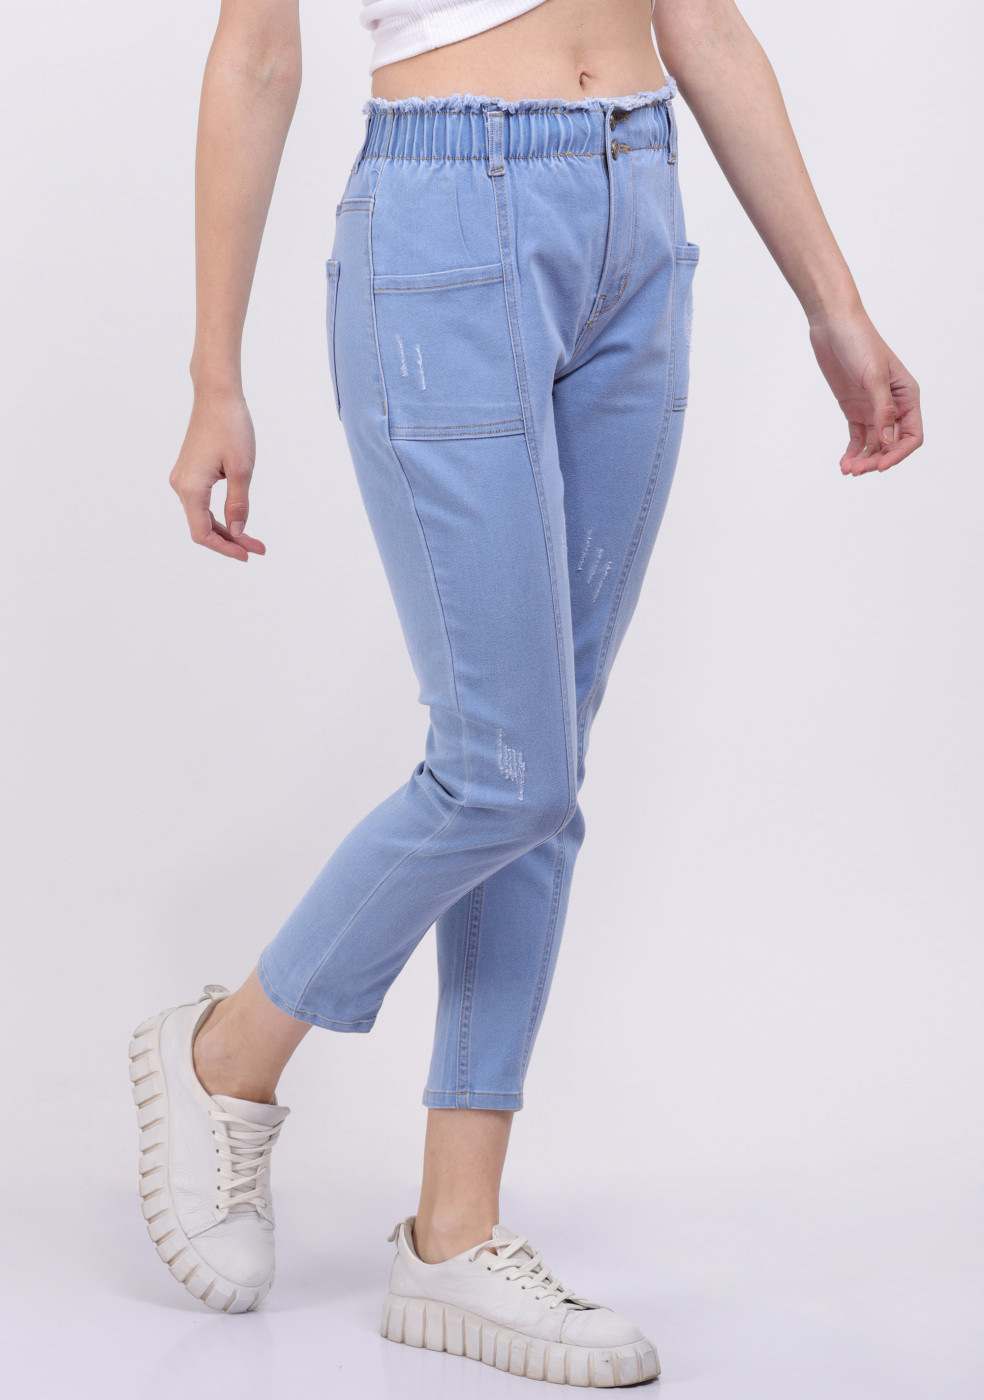 ICE Comfortable Jeans For Women